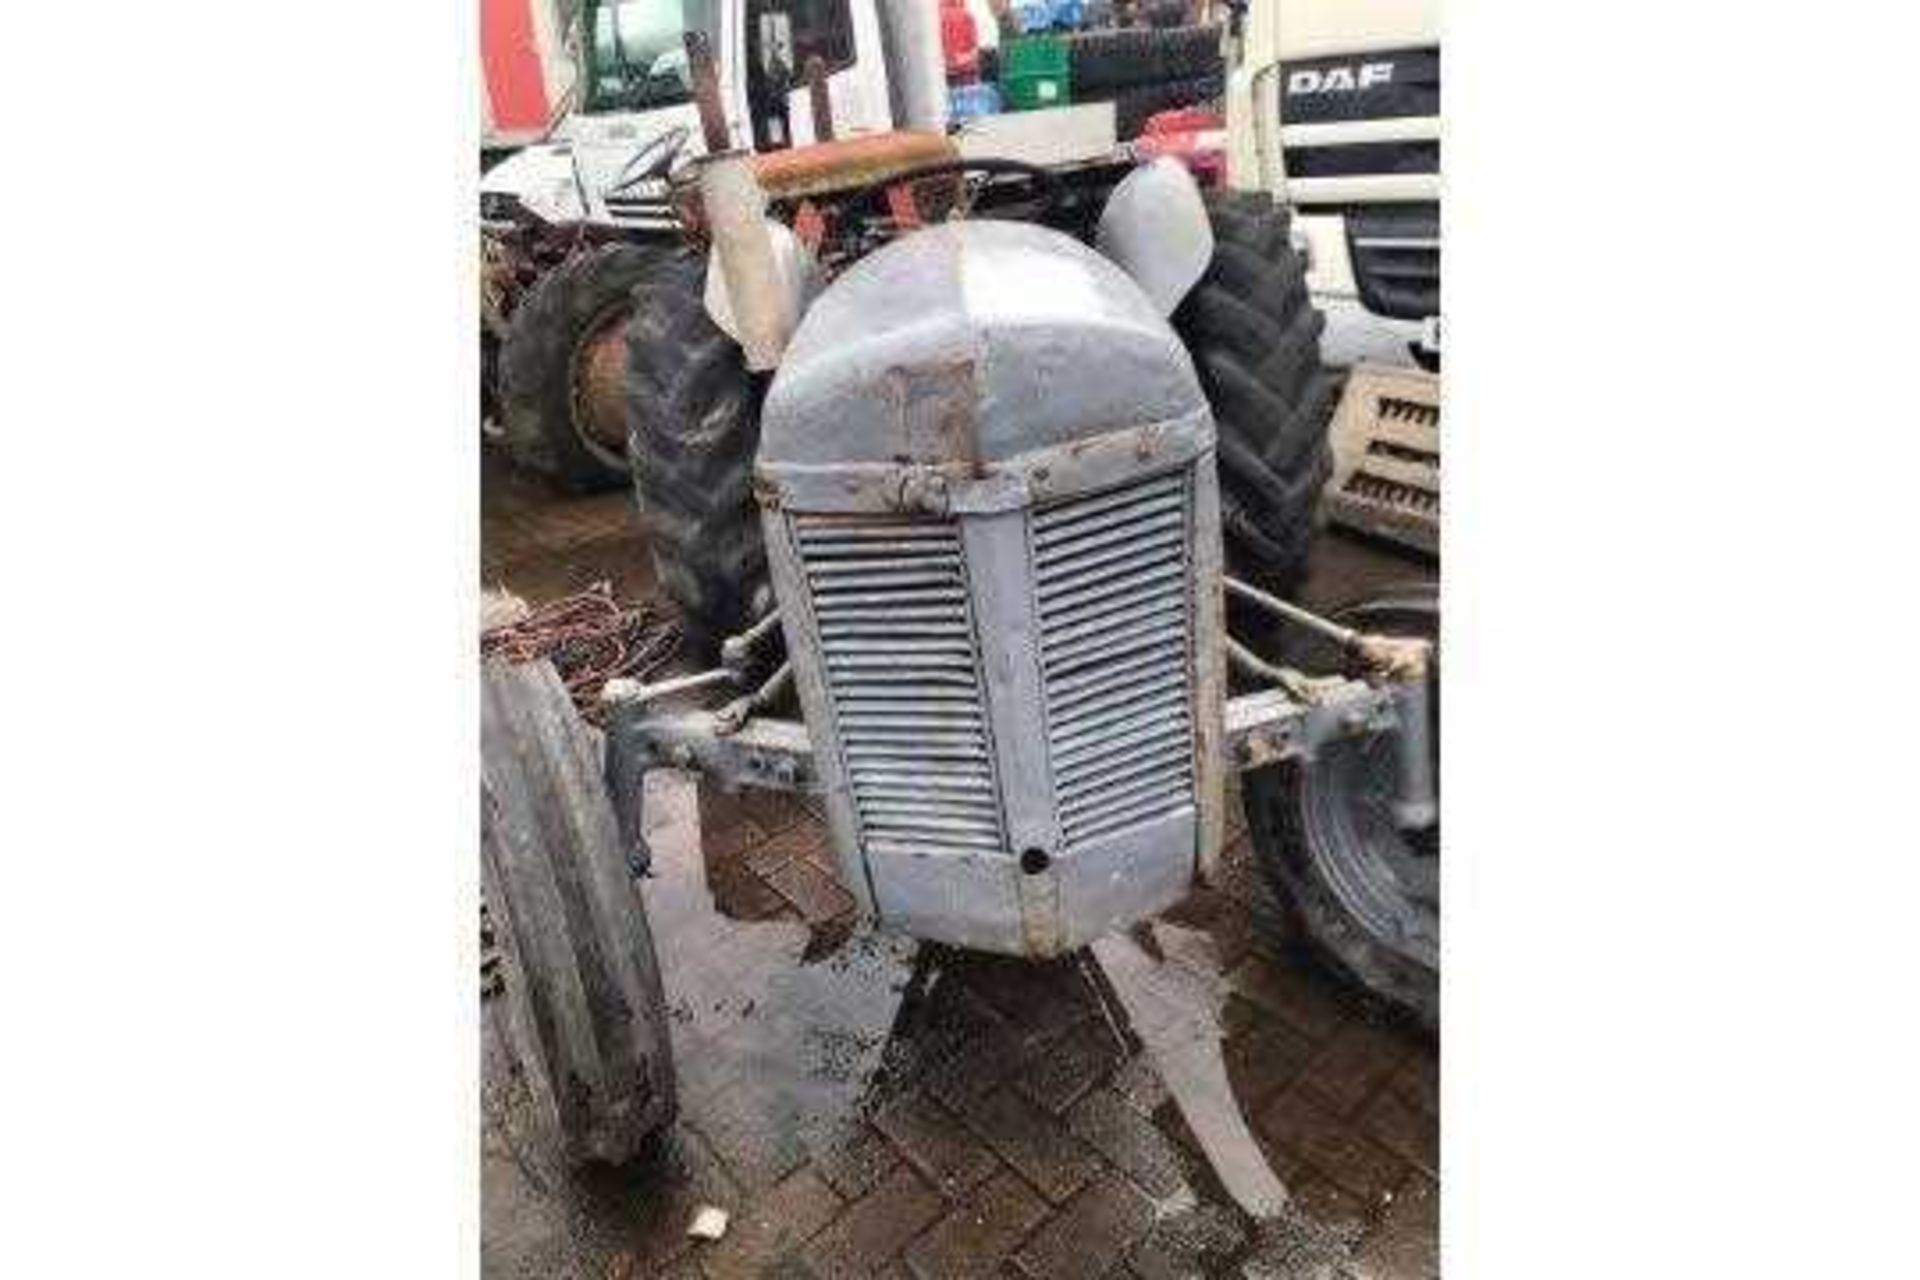 Massey Ferguson 35X Tractor, 2wd, manual PTO, currently in Selby (Yorks) due to transport issues and - Image 2 of 8